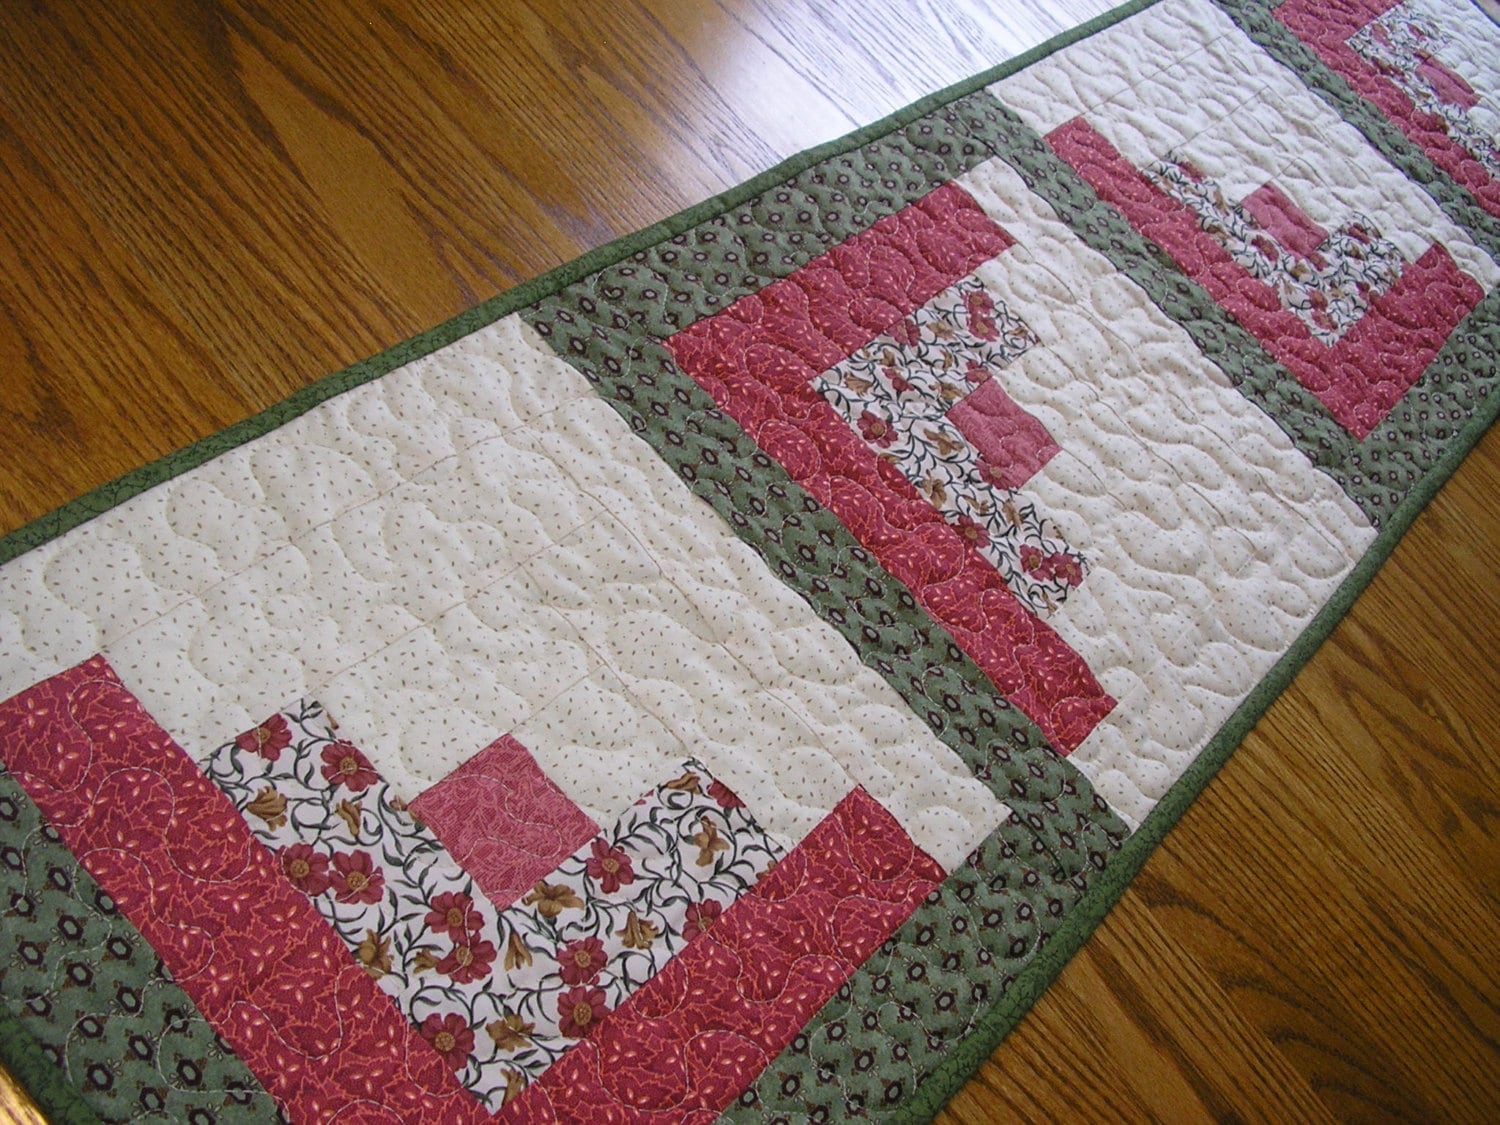 Quilted Table Runner Log Cabin 14 1/2 x 55 by simpletreasures55